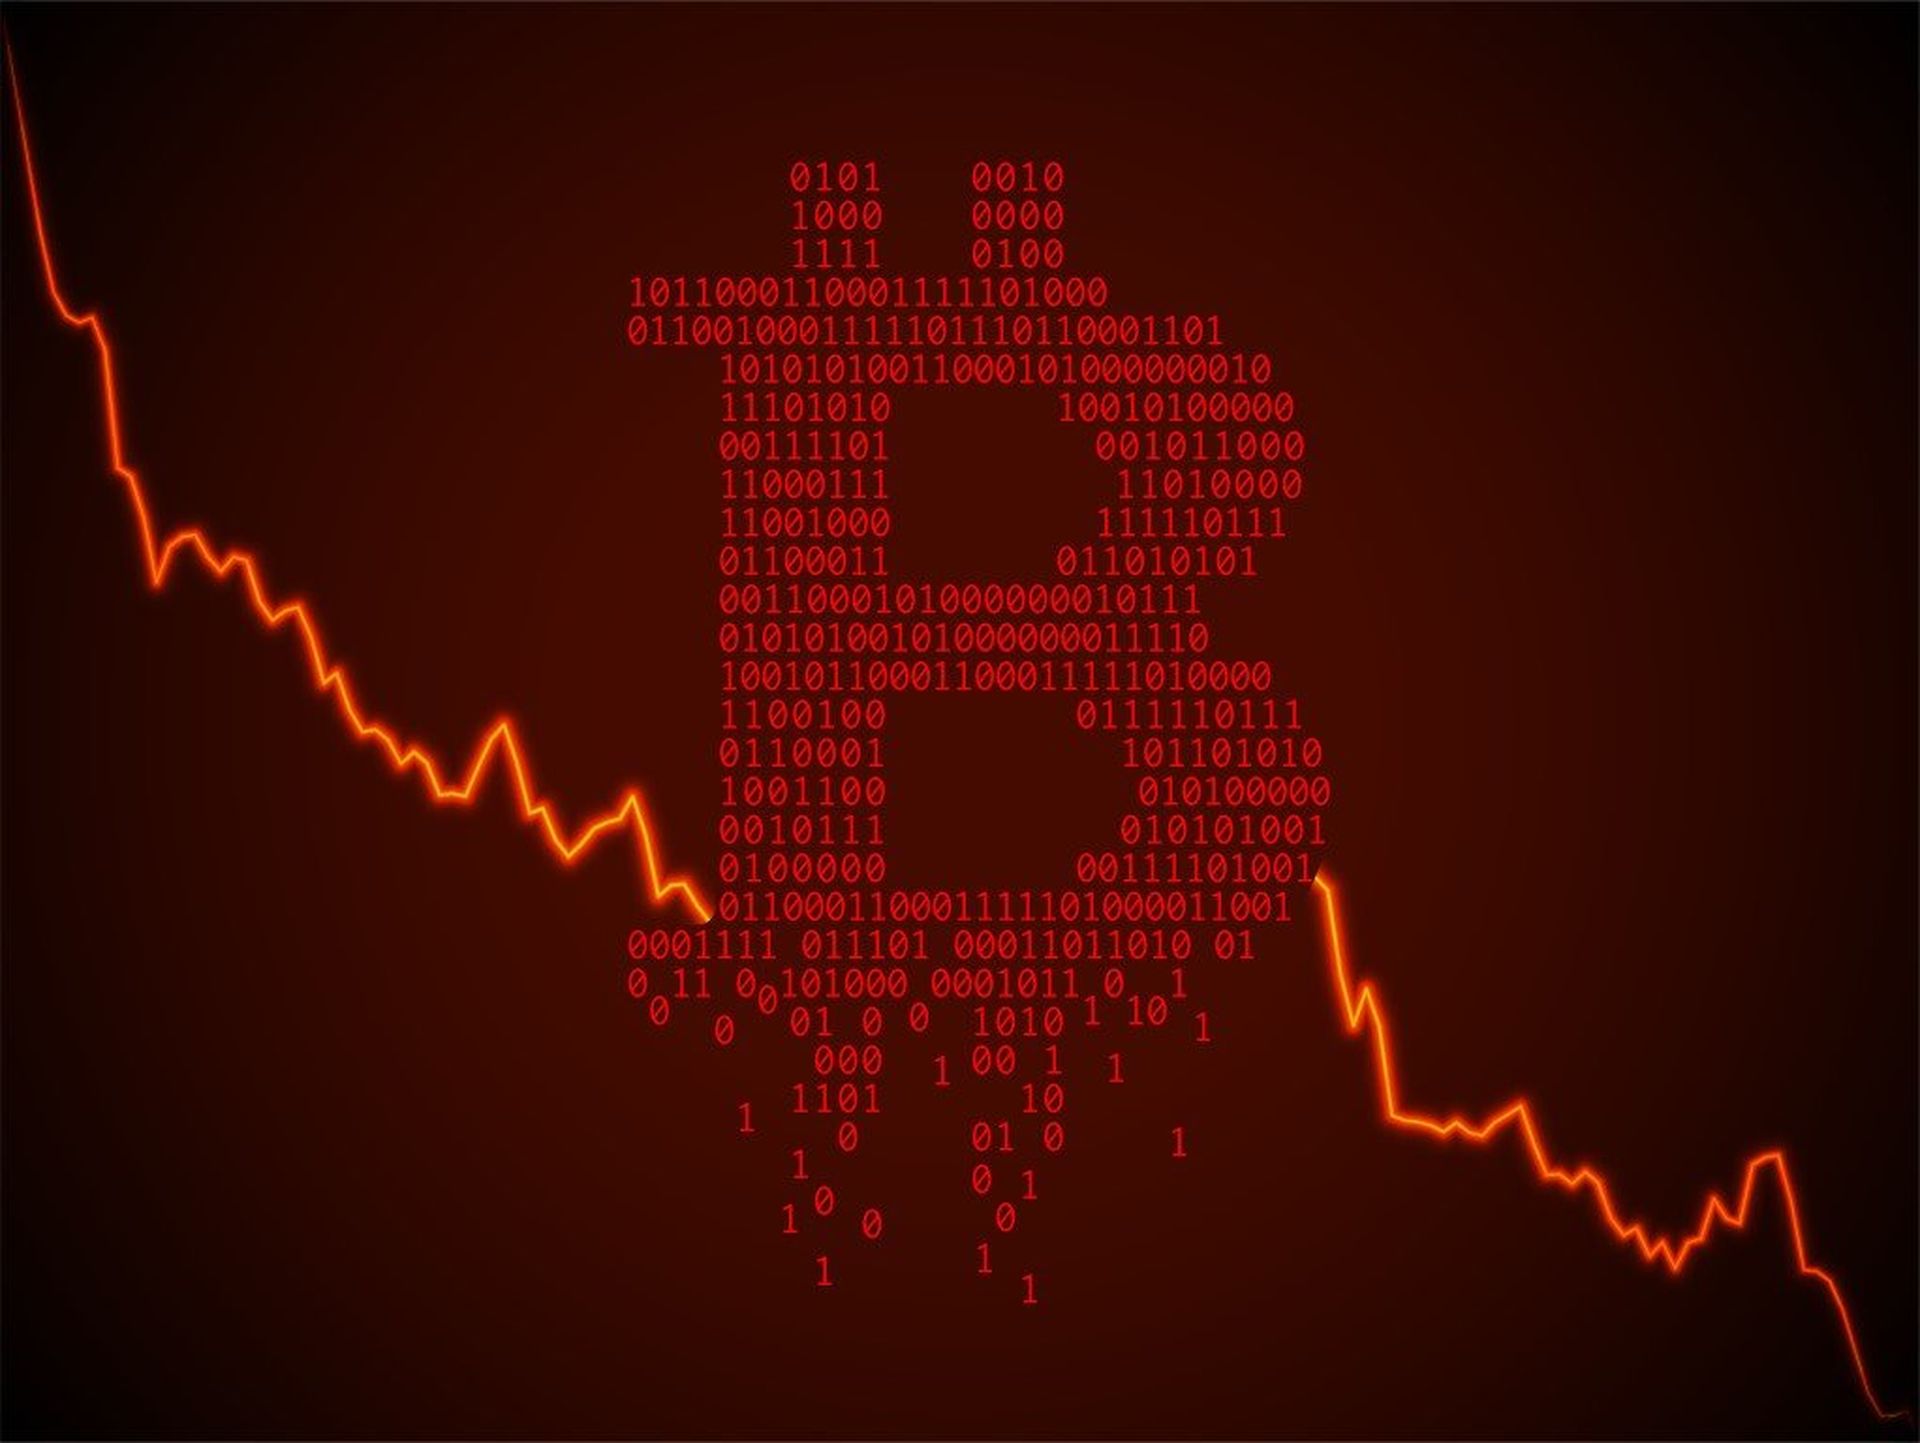 Today, we are covering the China Bitcoin prediction, which comes after the fact that crypto banned in China, and will answer how low will Bitcoin go.